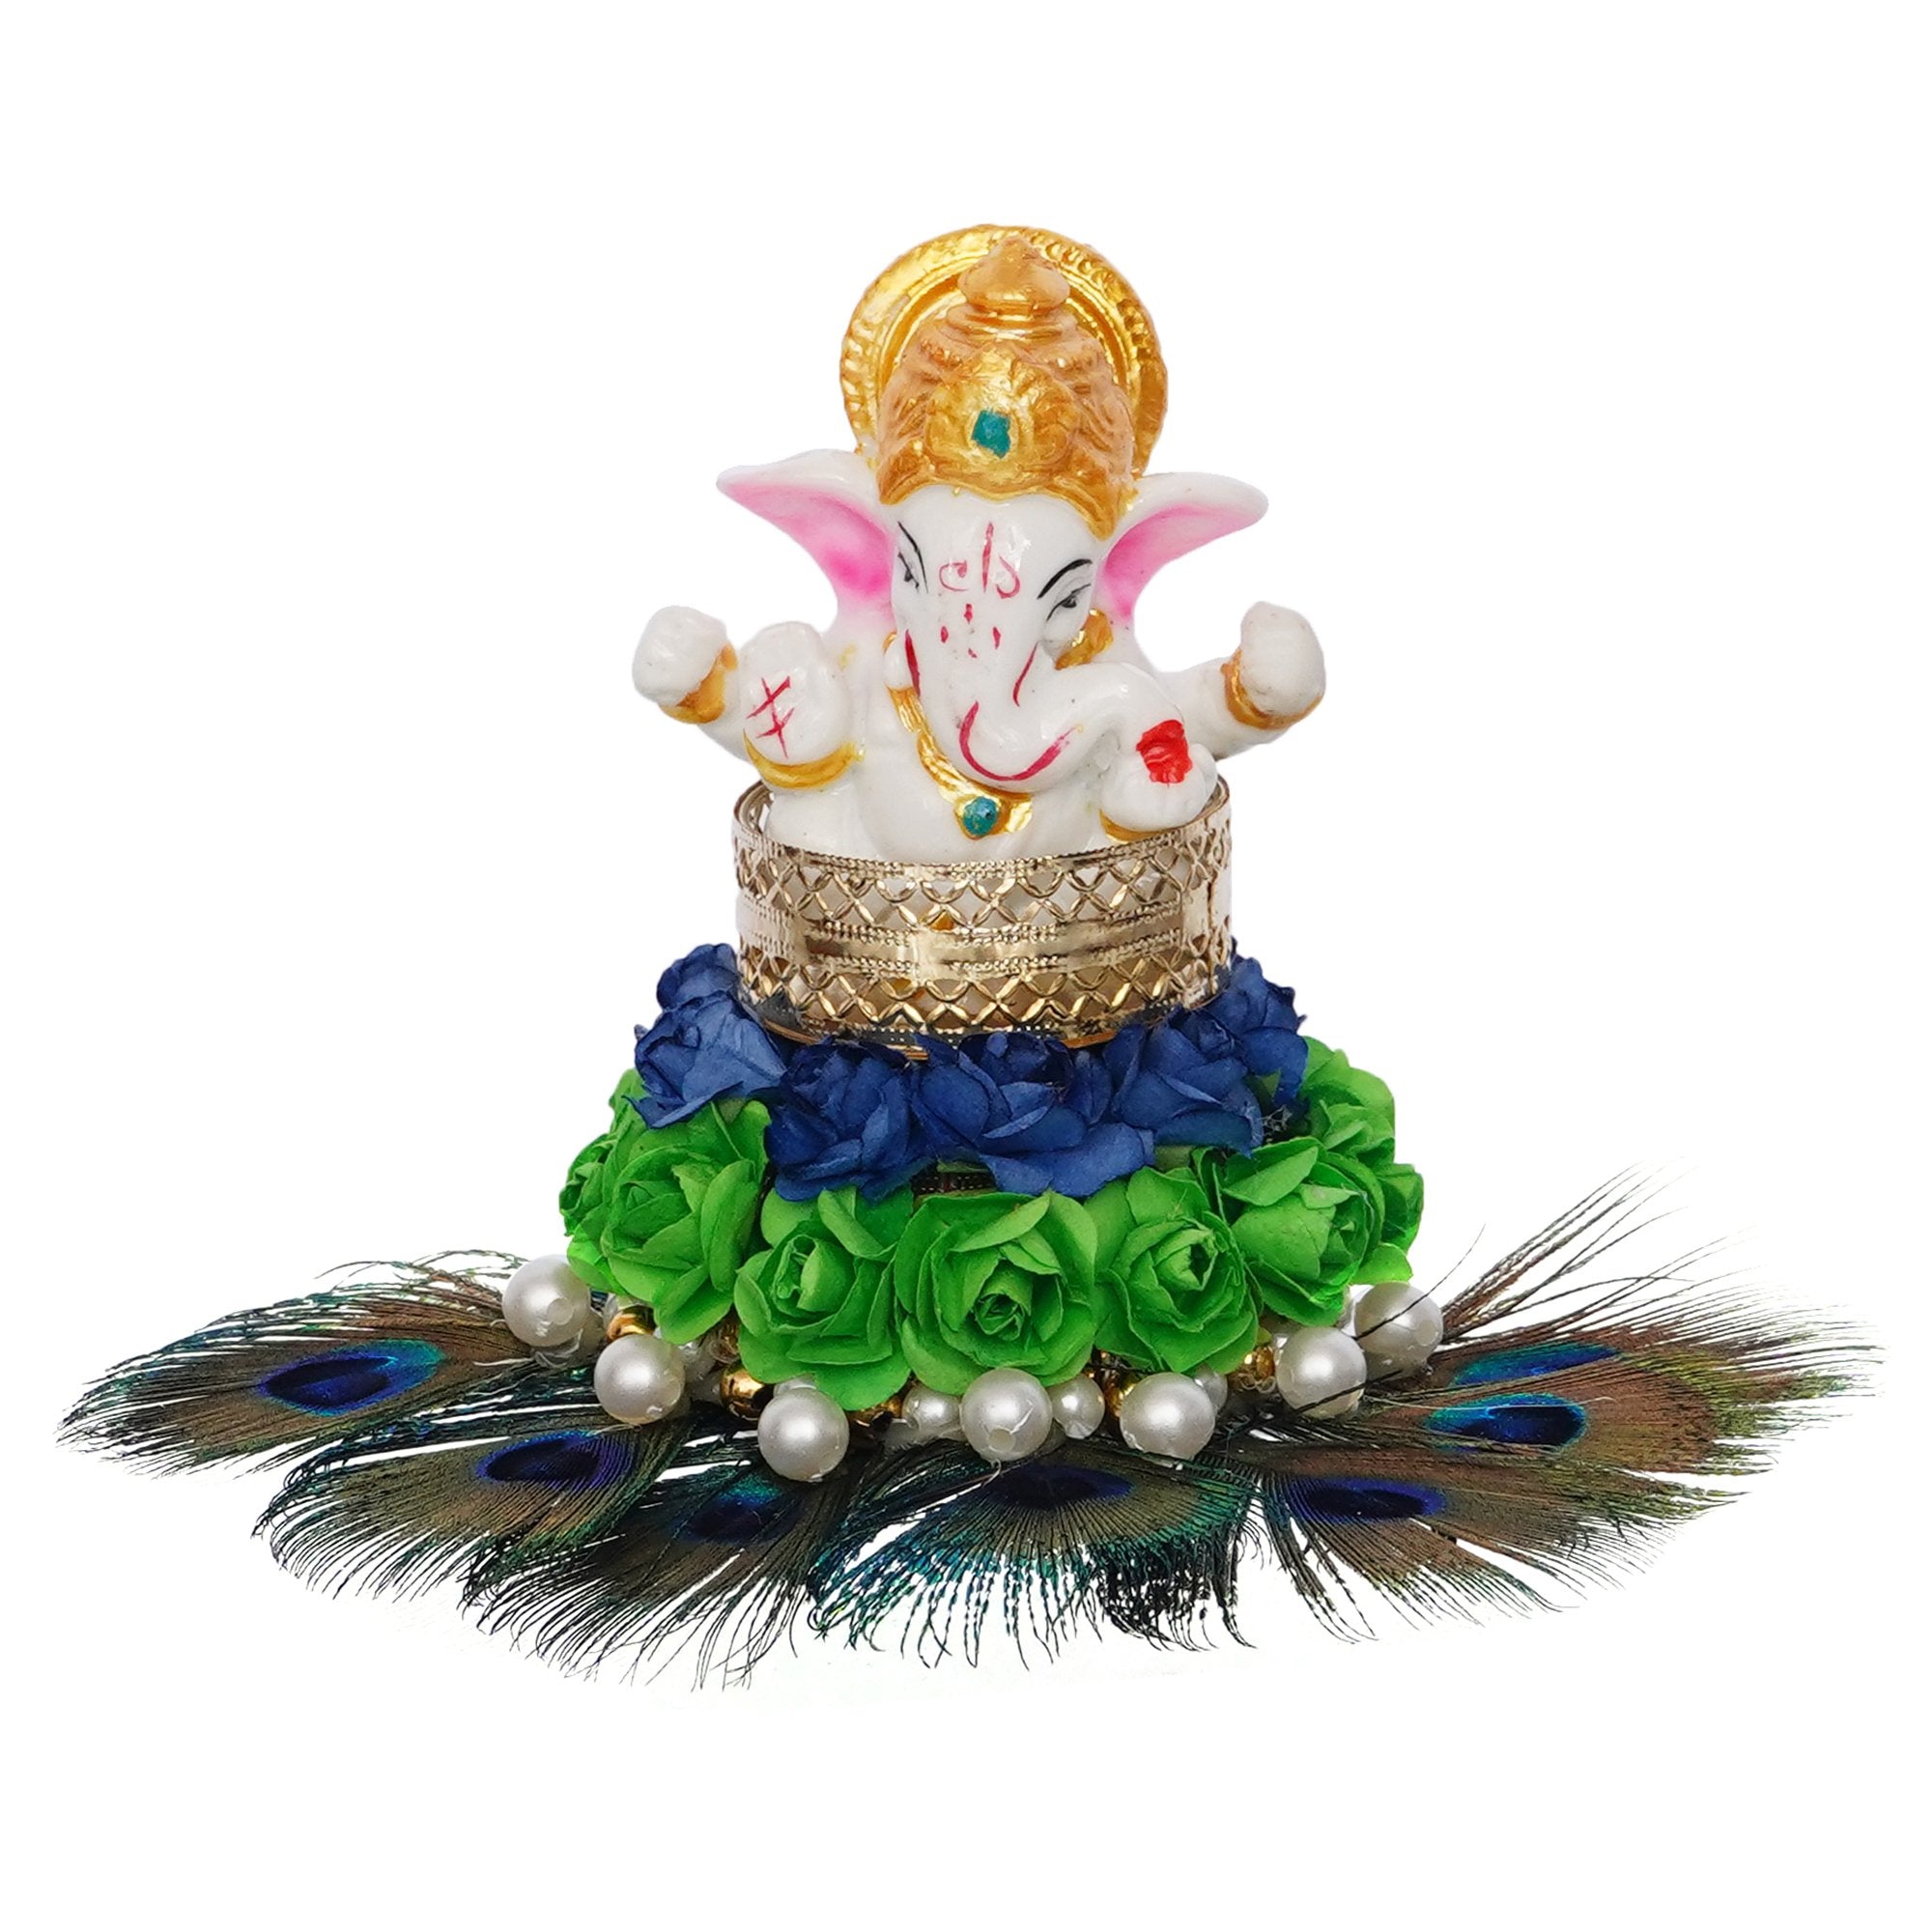 Lord Ganesha Idol on Decorative Handcrafted Floral Plate with Peacock Feather for Home and Car 2